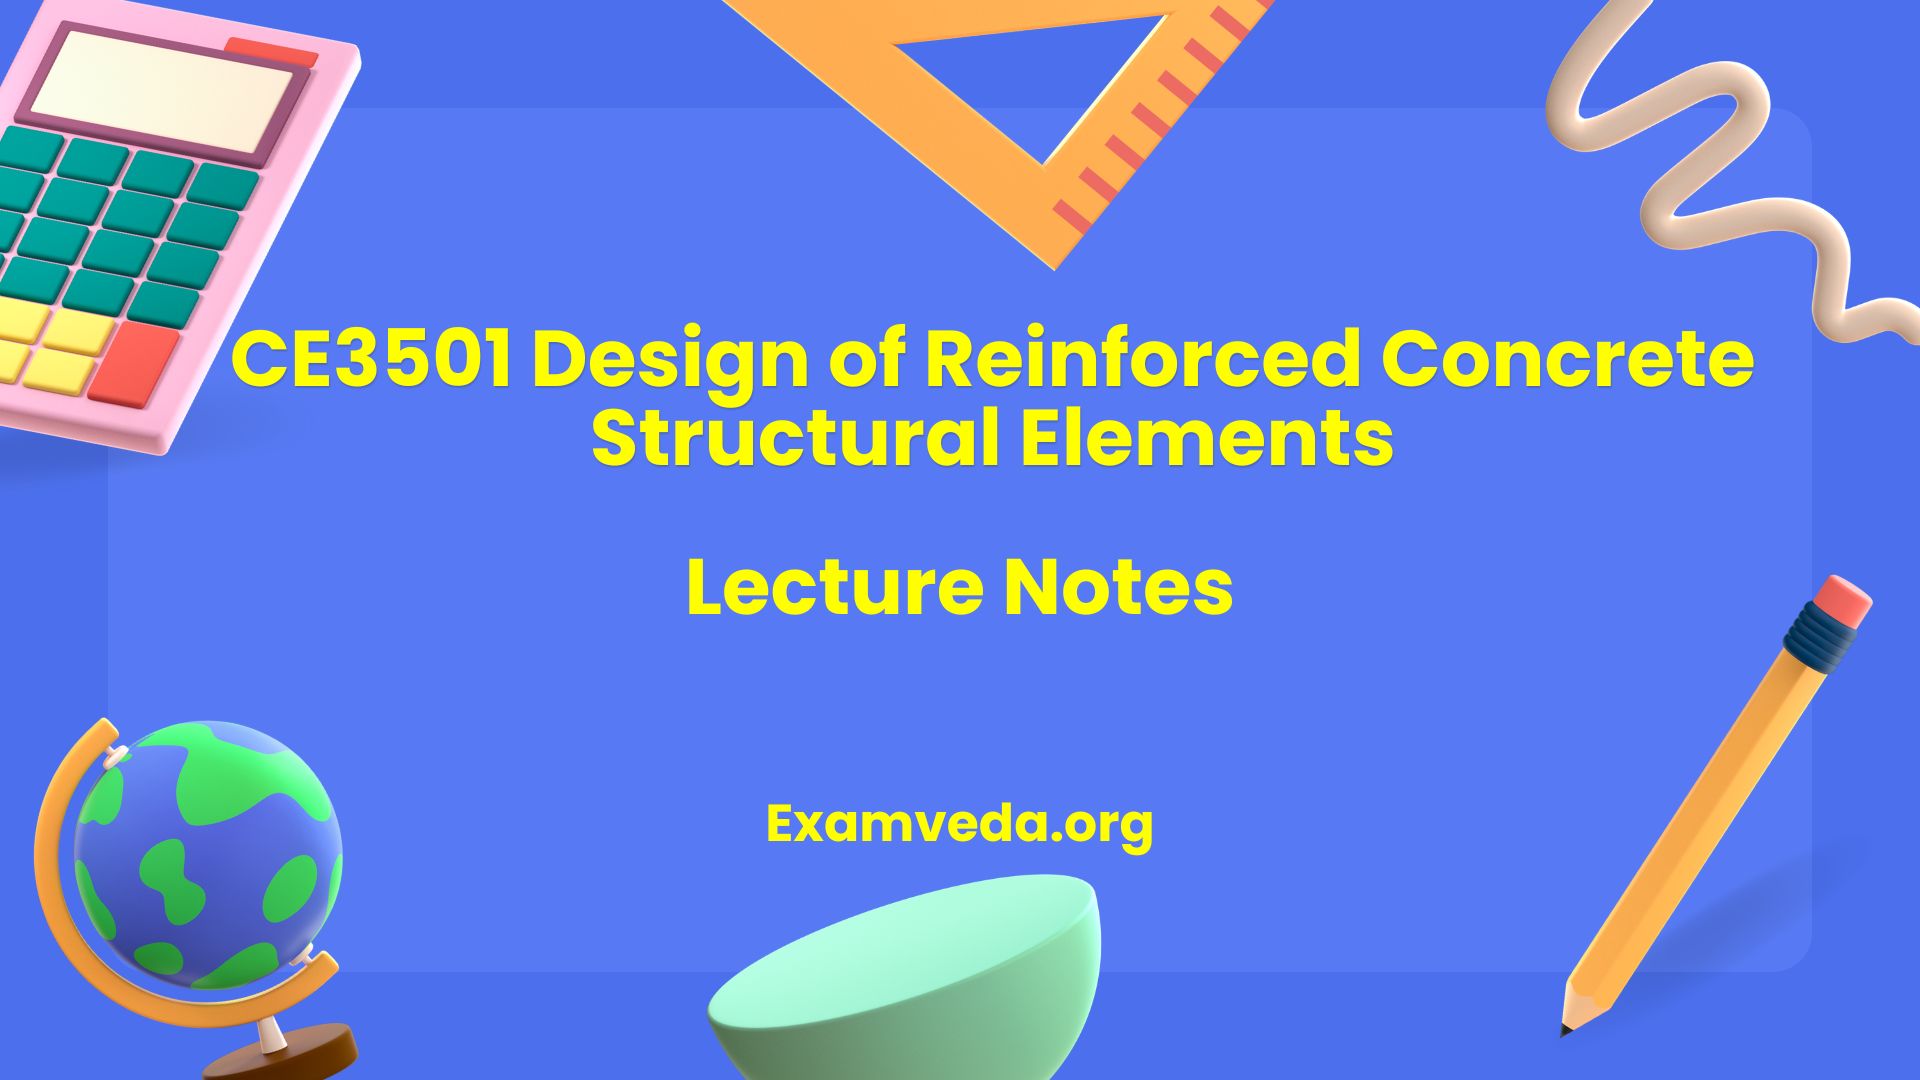 CE3501 Design of Reinforced Concrete Structural Elements Lecture Notes